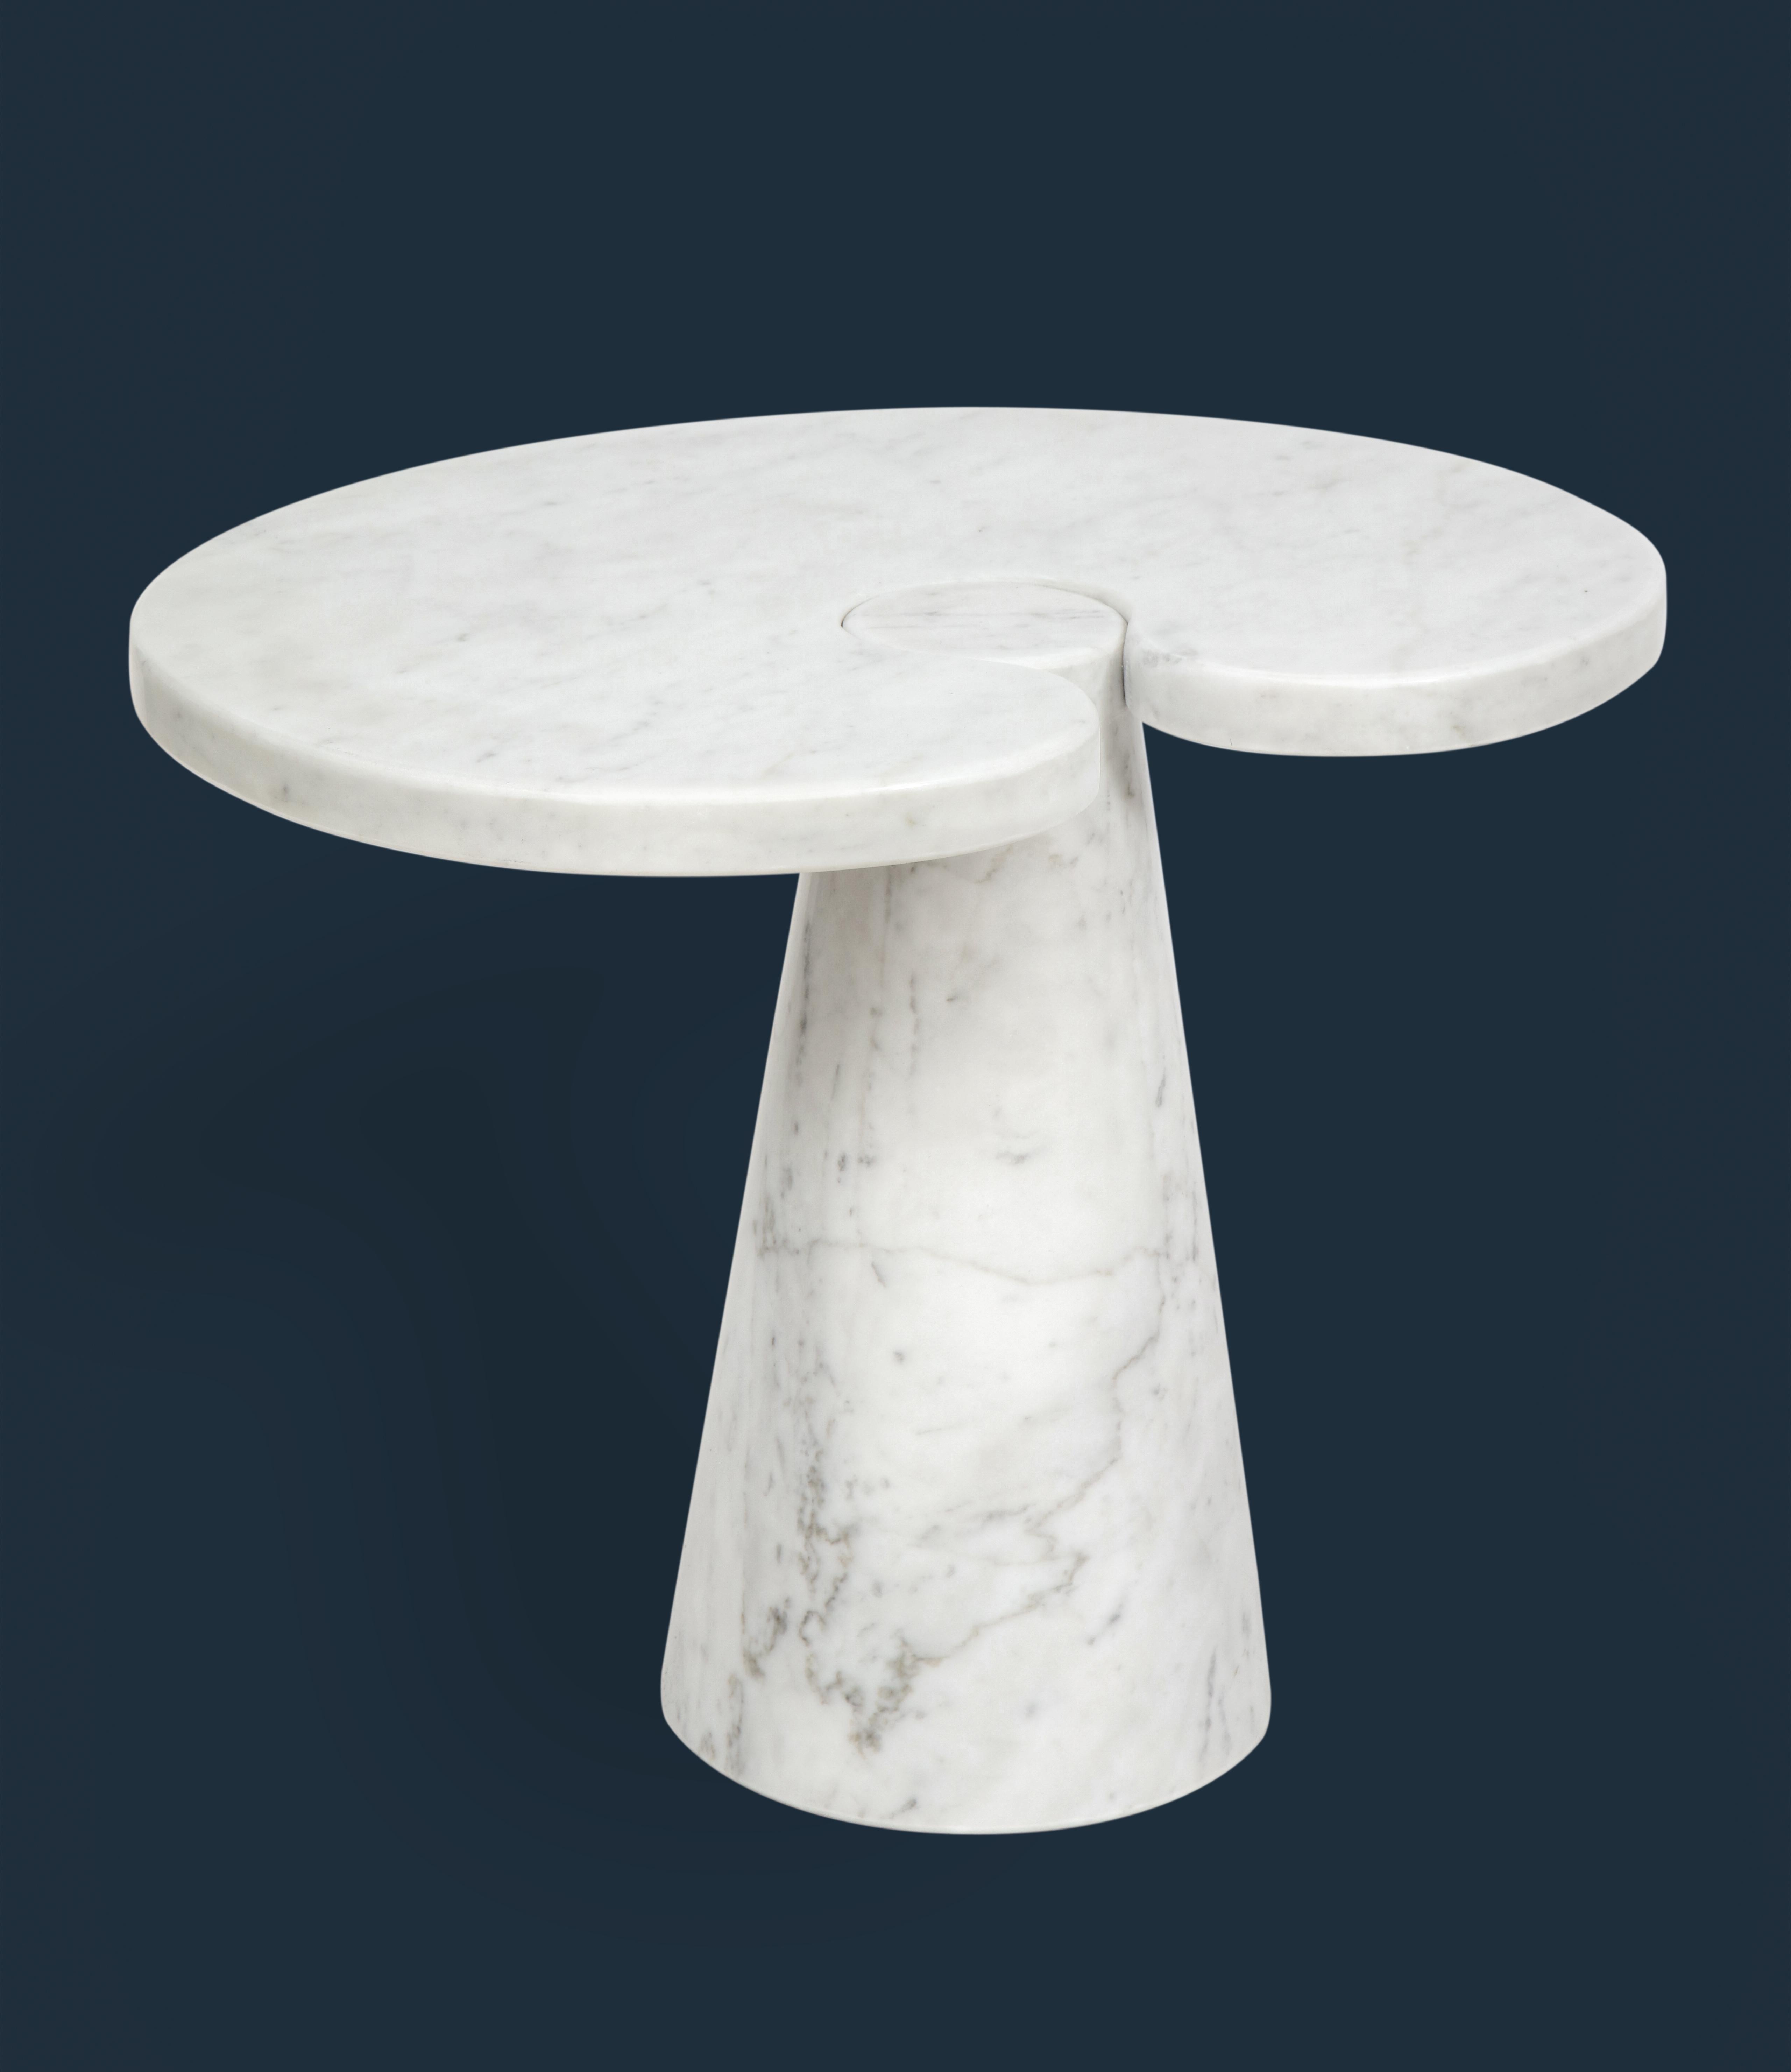 Designed by Angelo Mangiarotti for Skipper from the 'Eros' series, Carrara marble side table with top fitted on conical base.

Given Mangiarotti's research on furniture without joints, this side table is an example of the result of a gravity